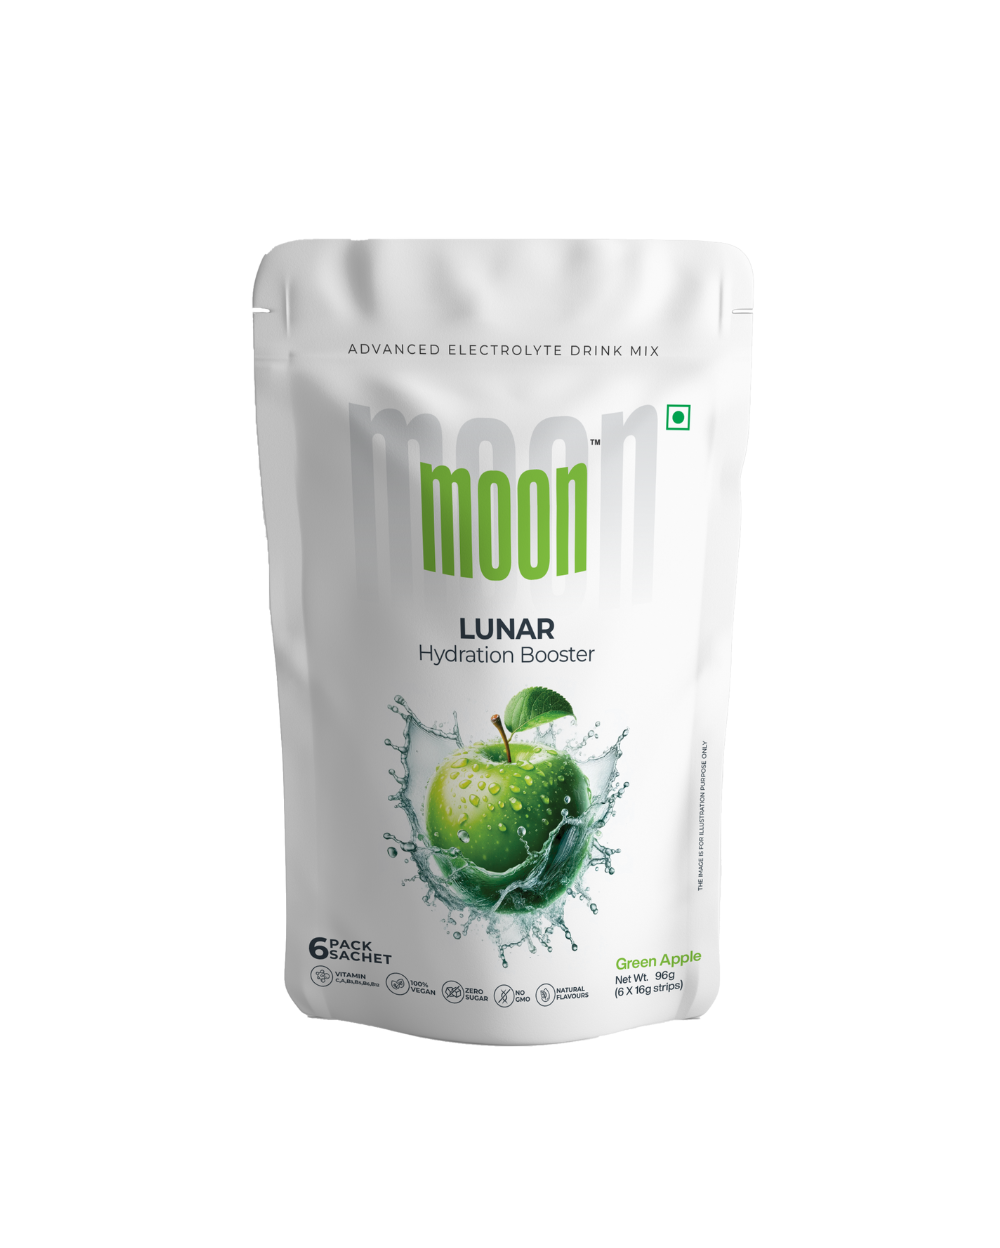 A pouch of Moon Green Apple Lunar Hydration Booster powder on a white background by MOONFREEZE FOODS PRIVATE LIMITED.